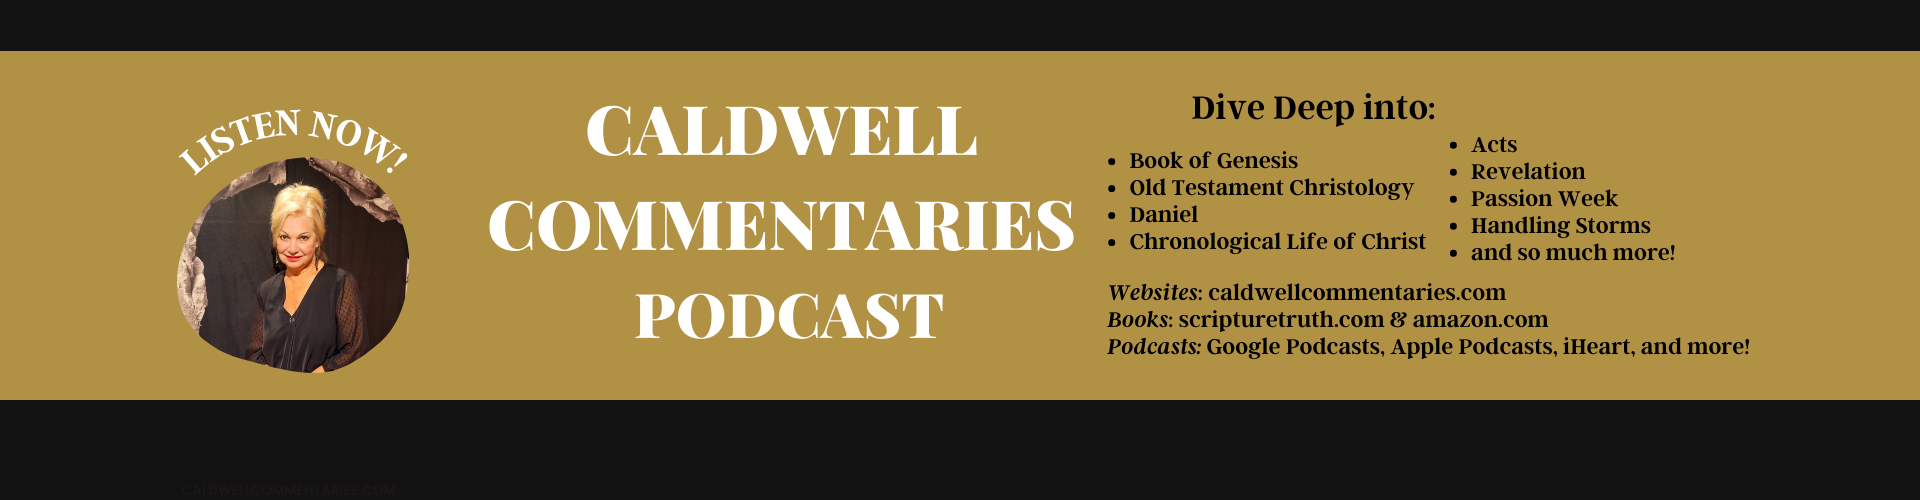 The Caldwell Commentaries Podcast